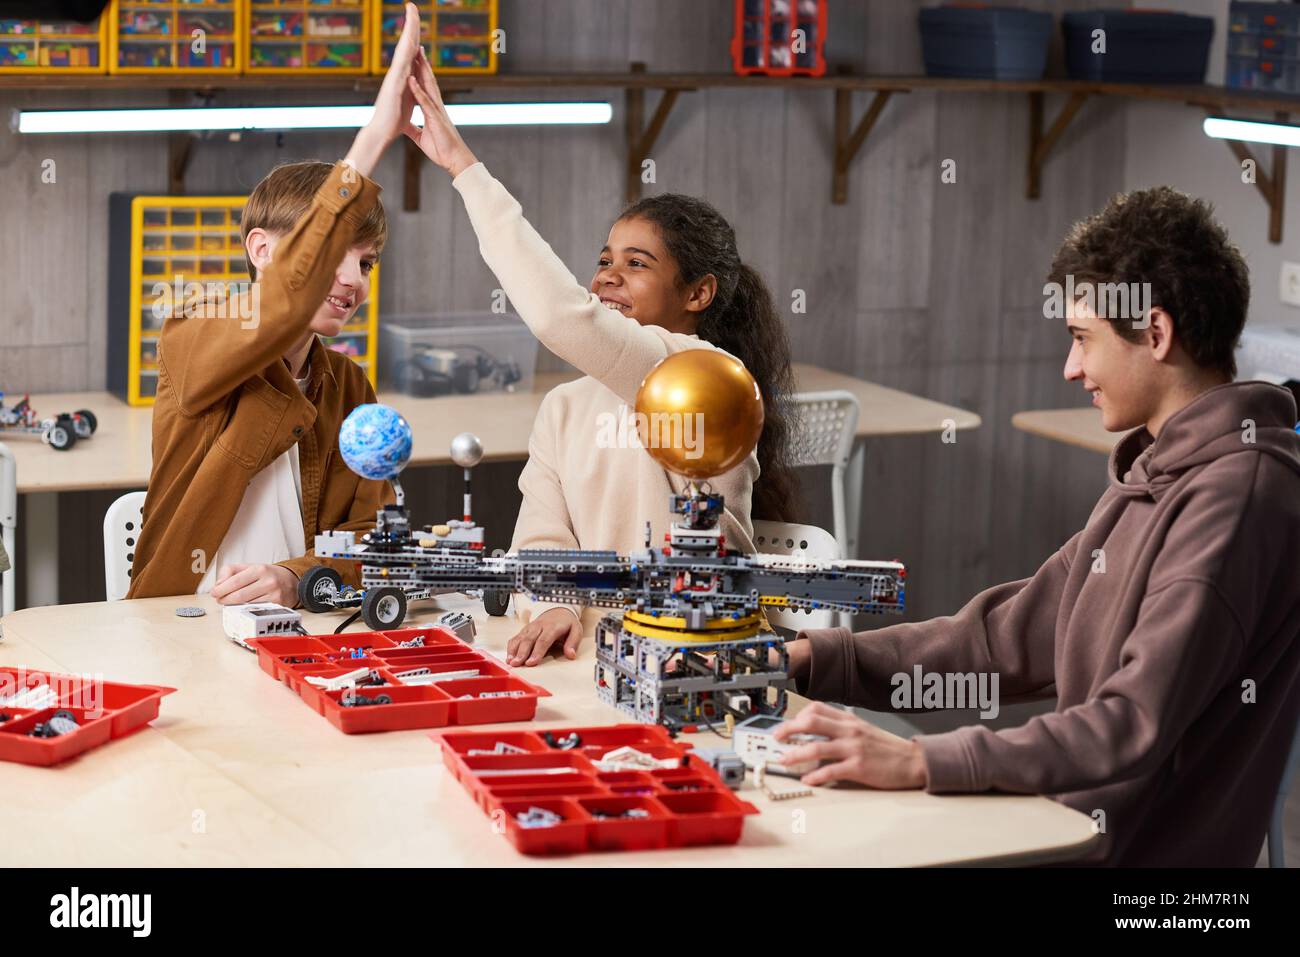 Group of teenage kids high fiving while enjoying building robots in engineering class at school, copy space Stock Photo